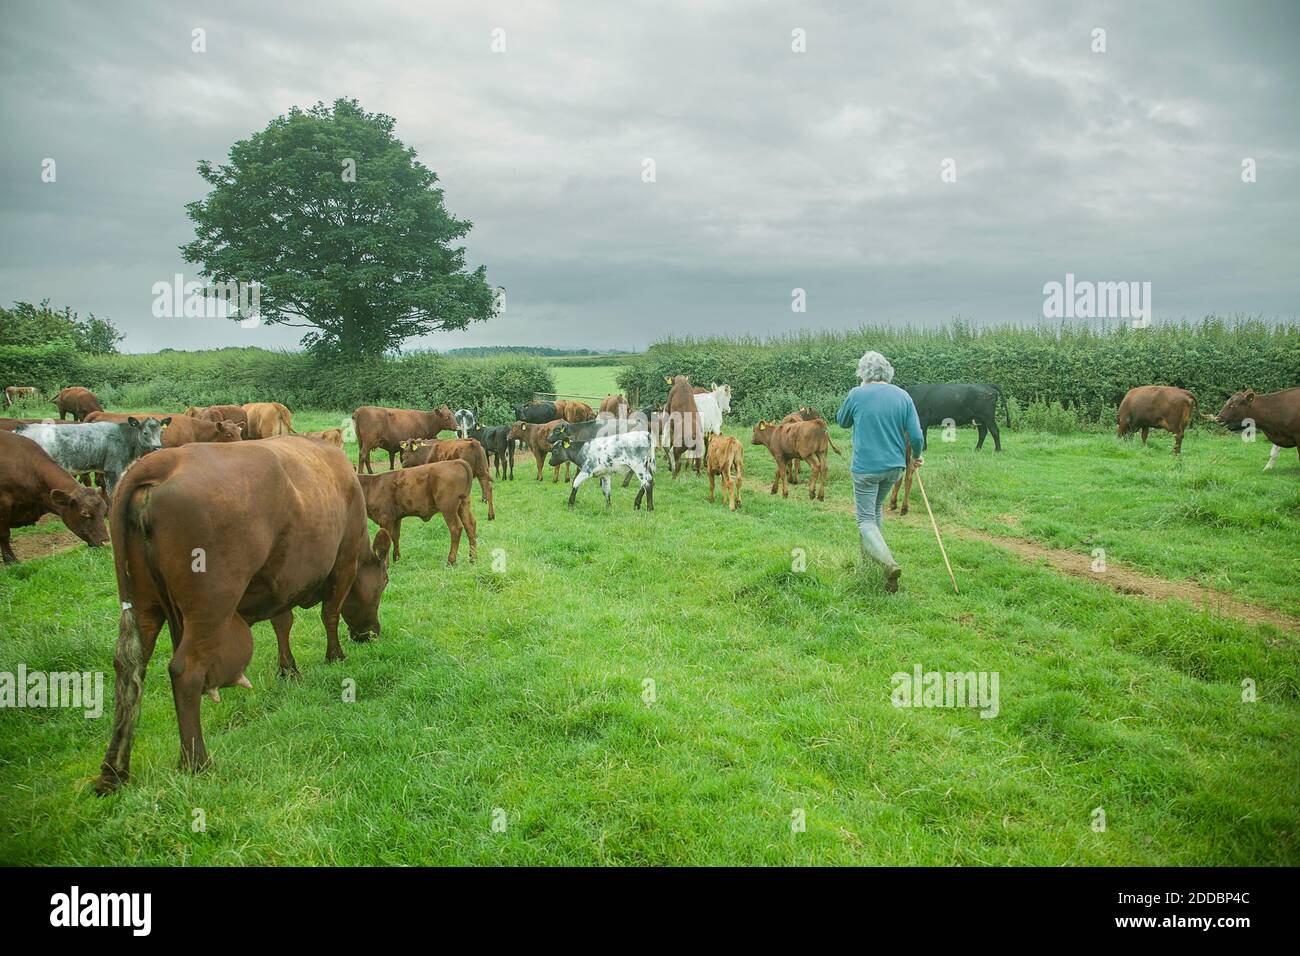 Man with dairy cattle standing at agricultural field Stock Photo